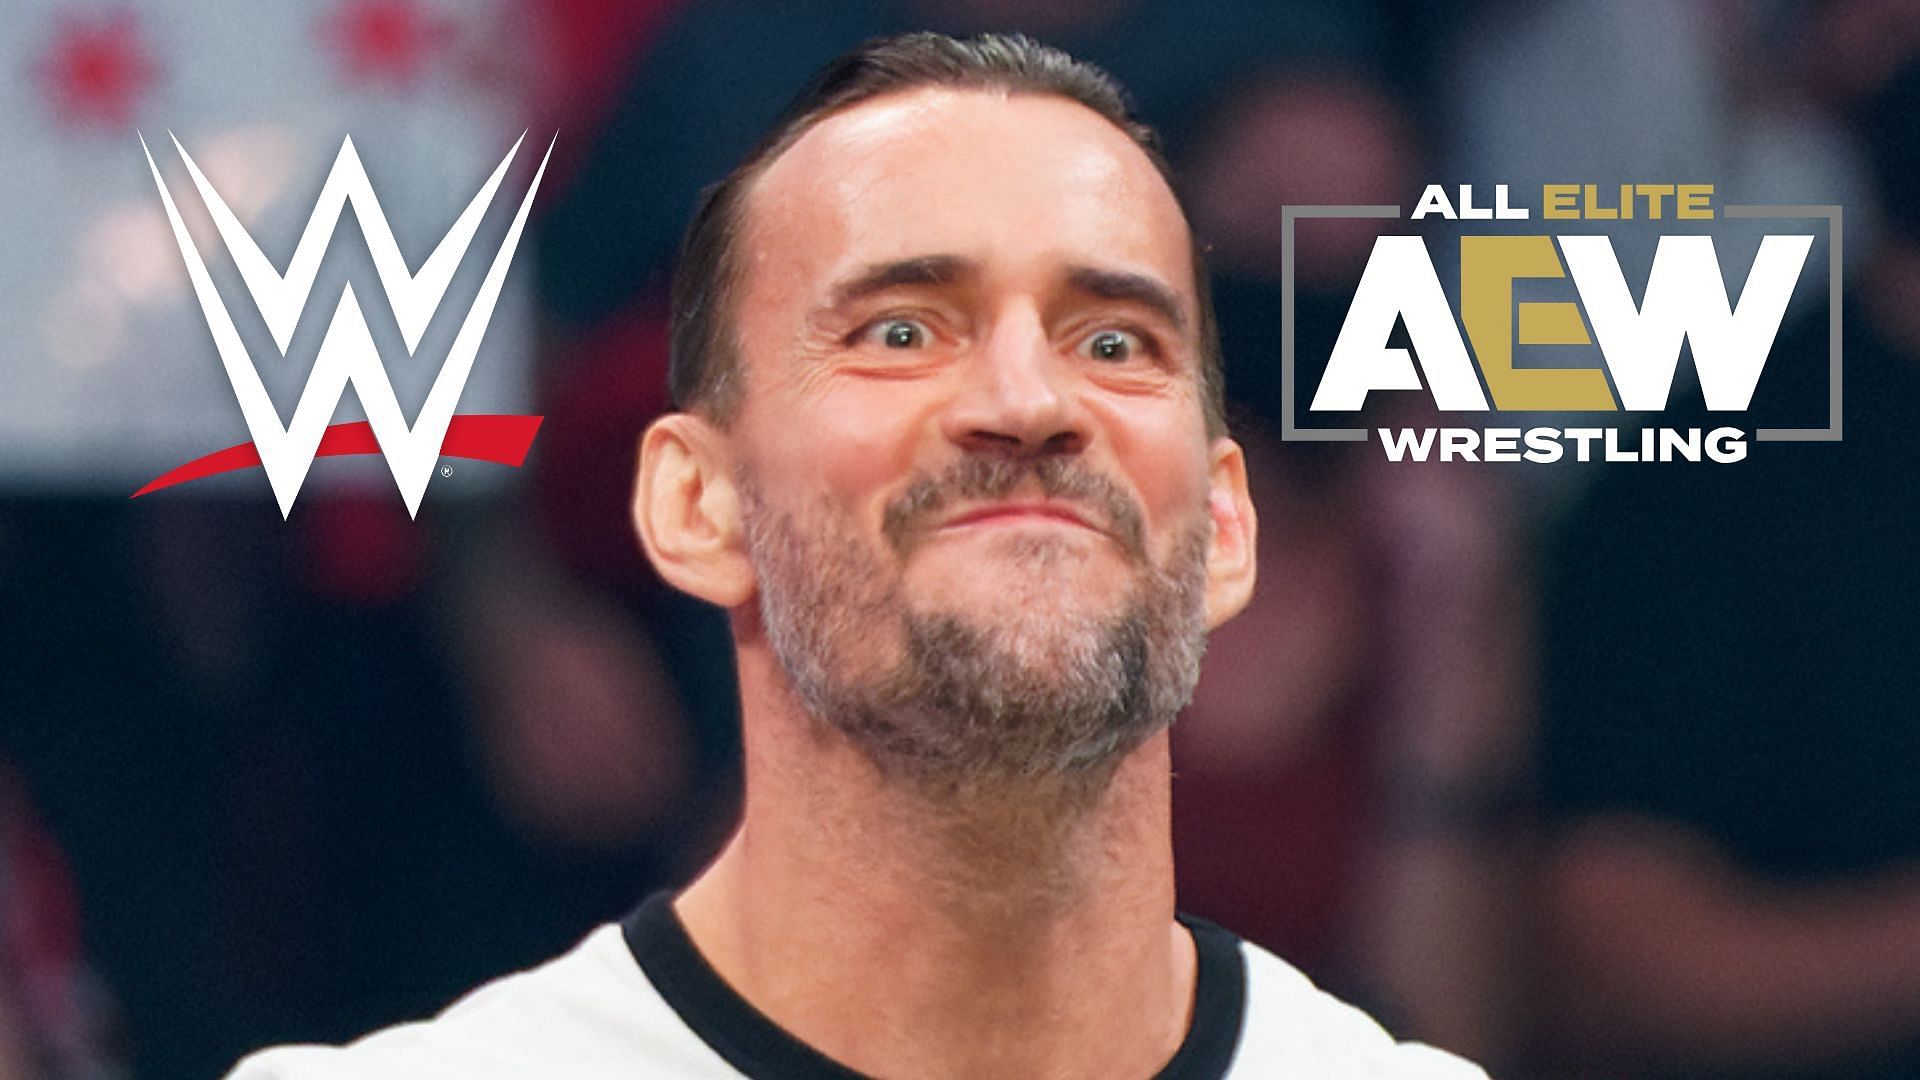 CM Punk and former WWE Superstars look to star on AEW